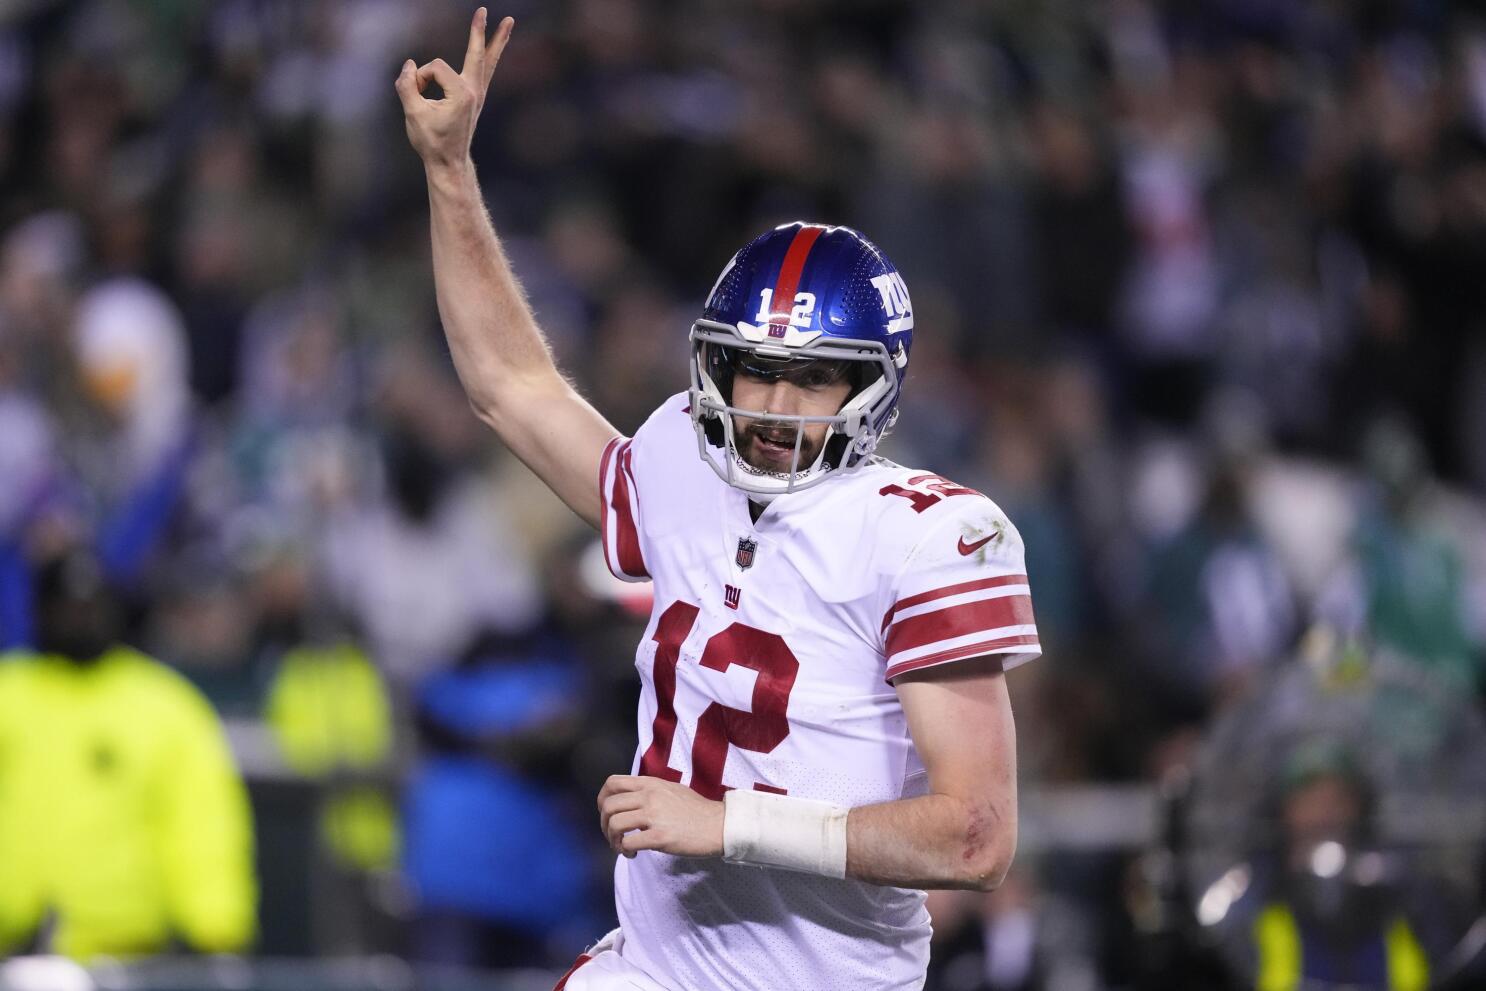 Giants defeat Vikings, advance to Divisional Round vs. rival Eagles